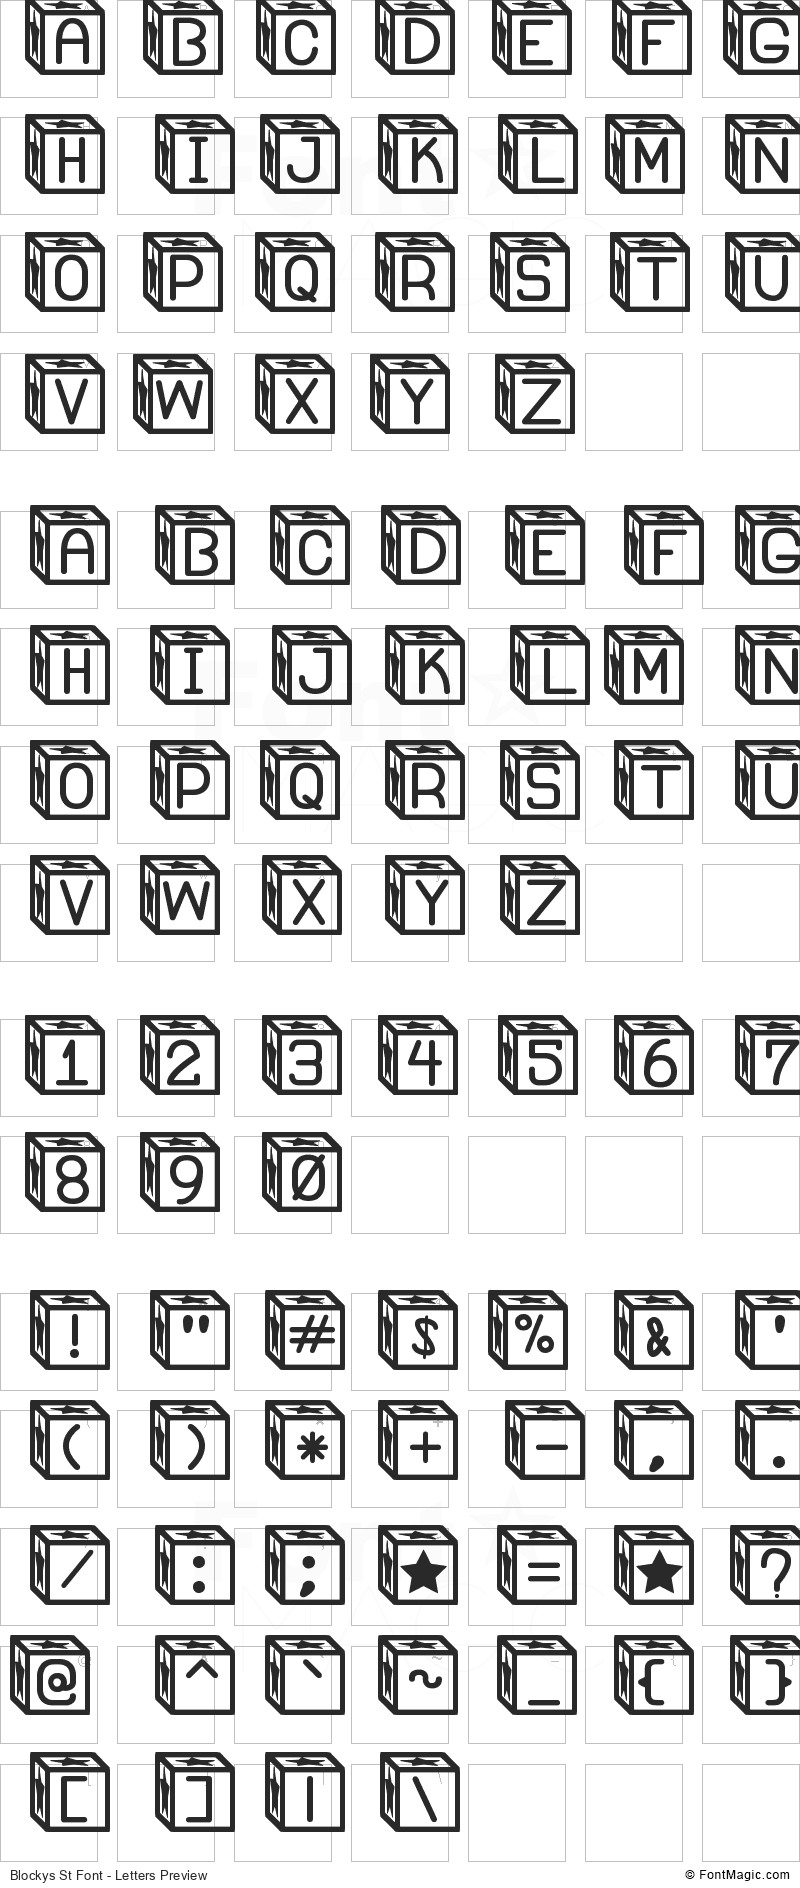 Blockys St Font - All Latters Preview Chart